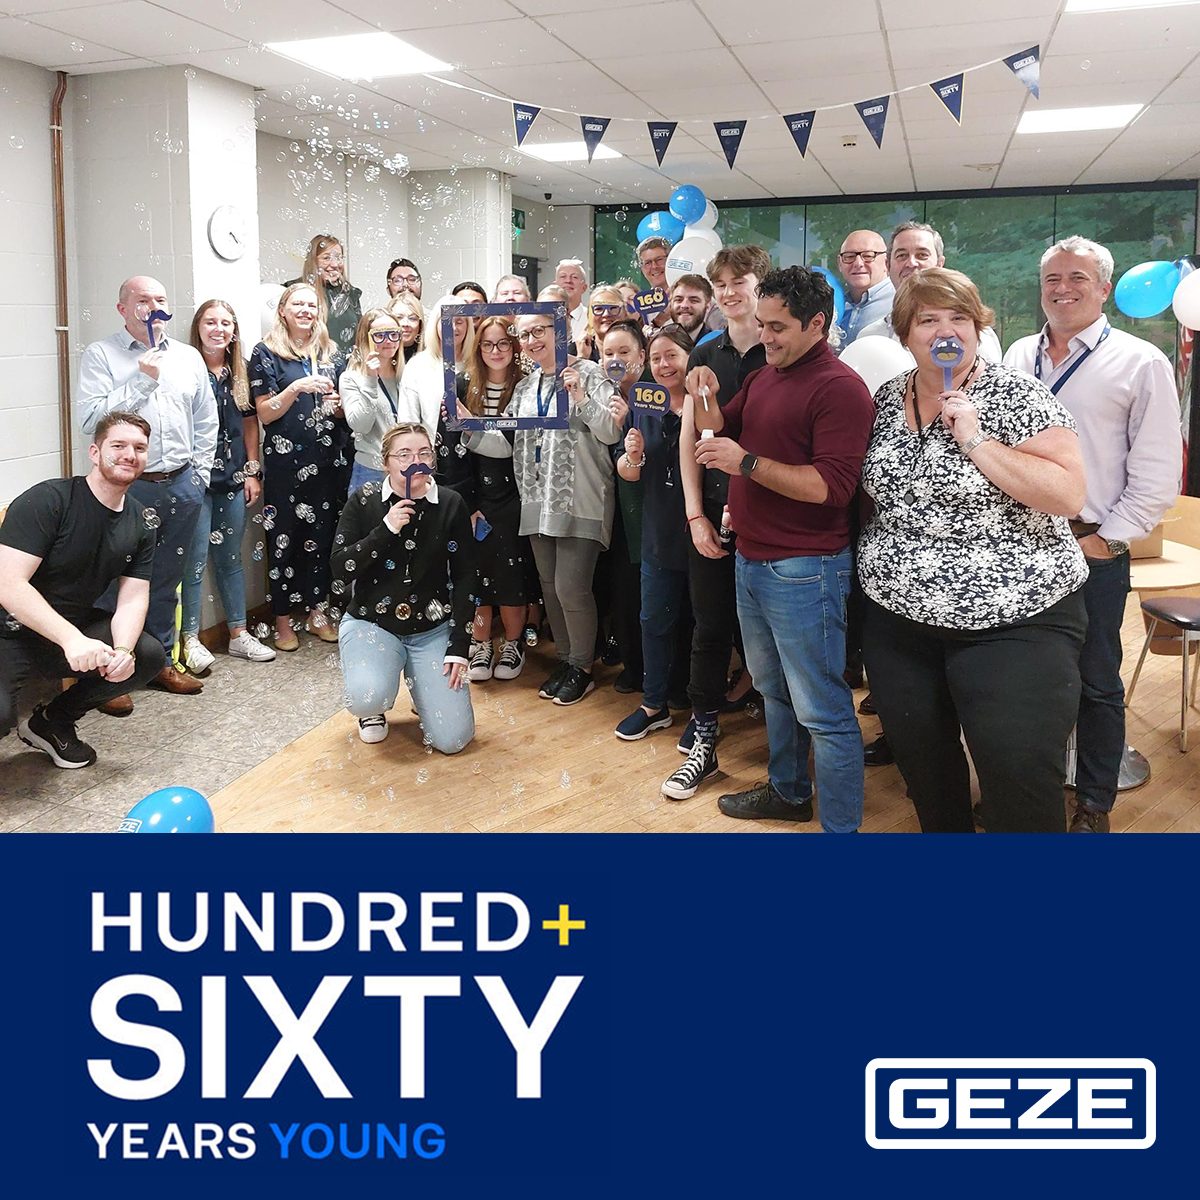 GEZE UK celebrates 160 years with bubbles, bunting and balloons